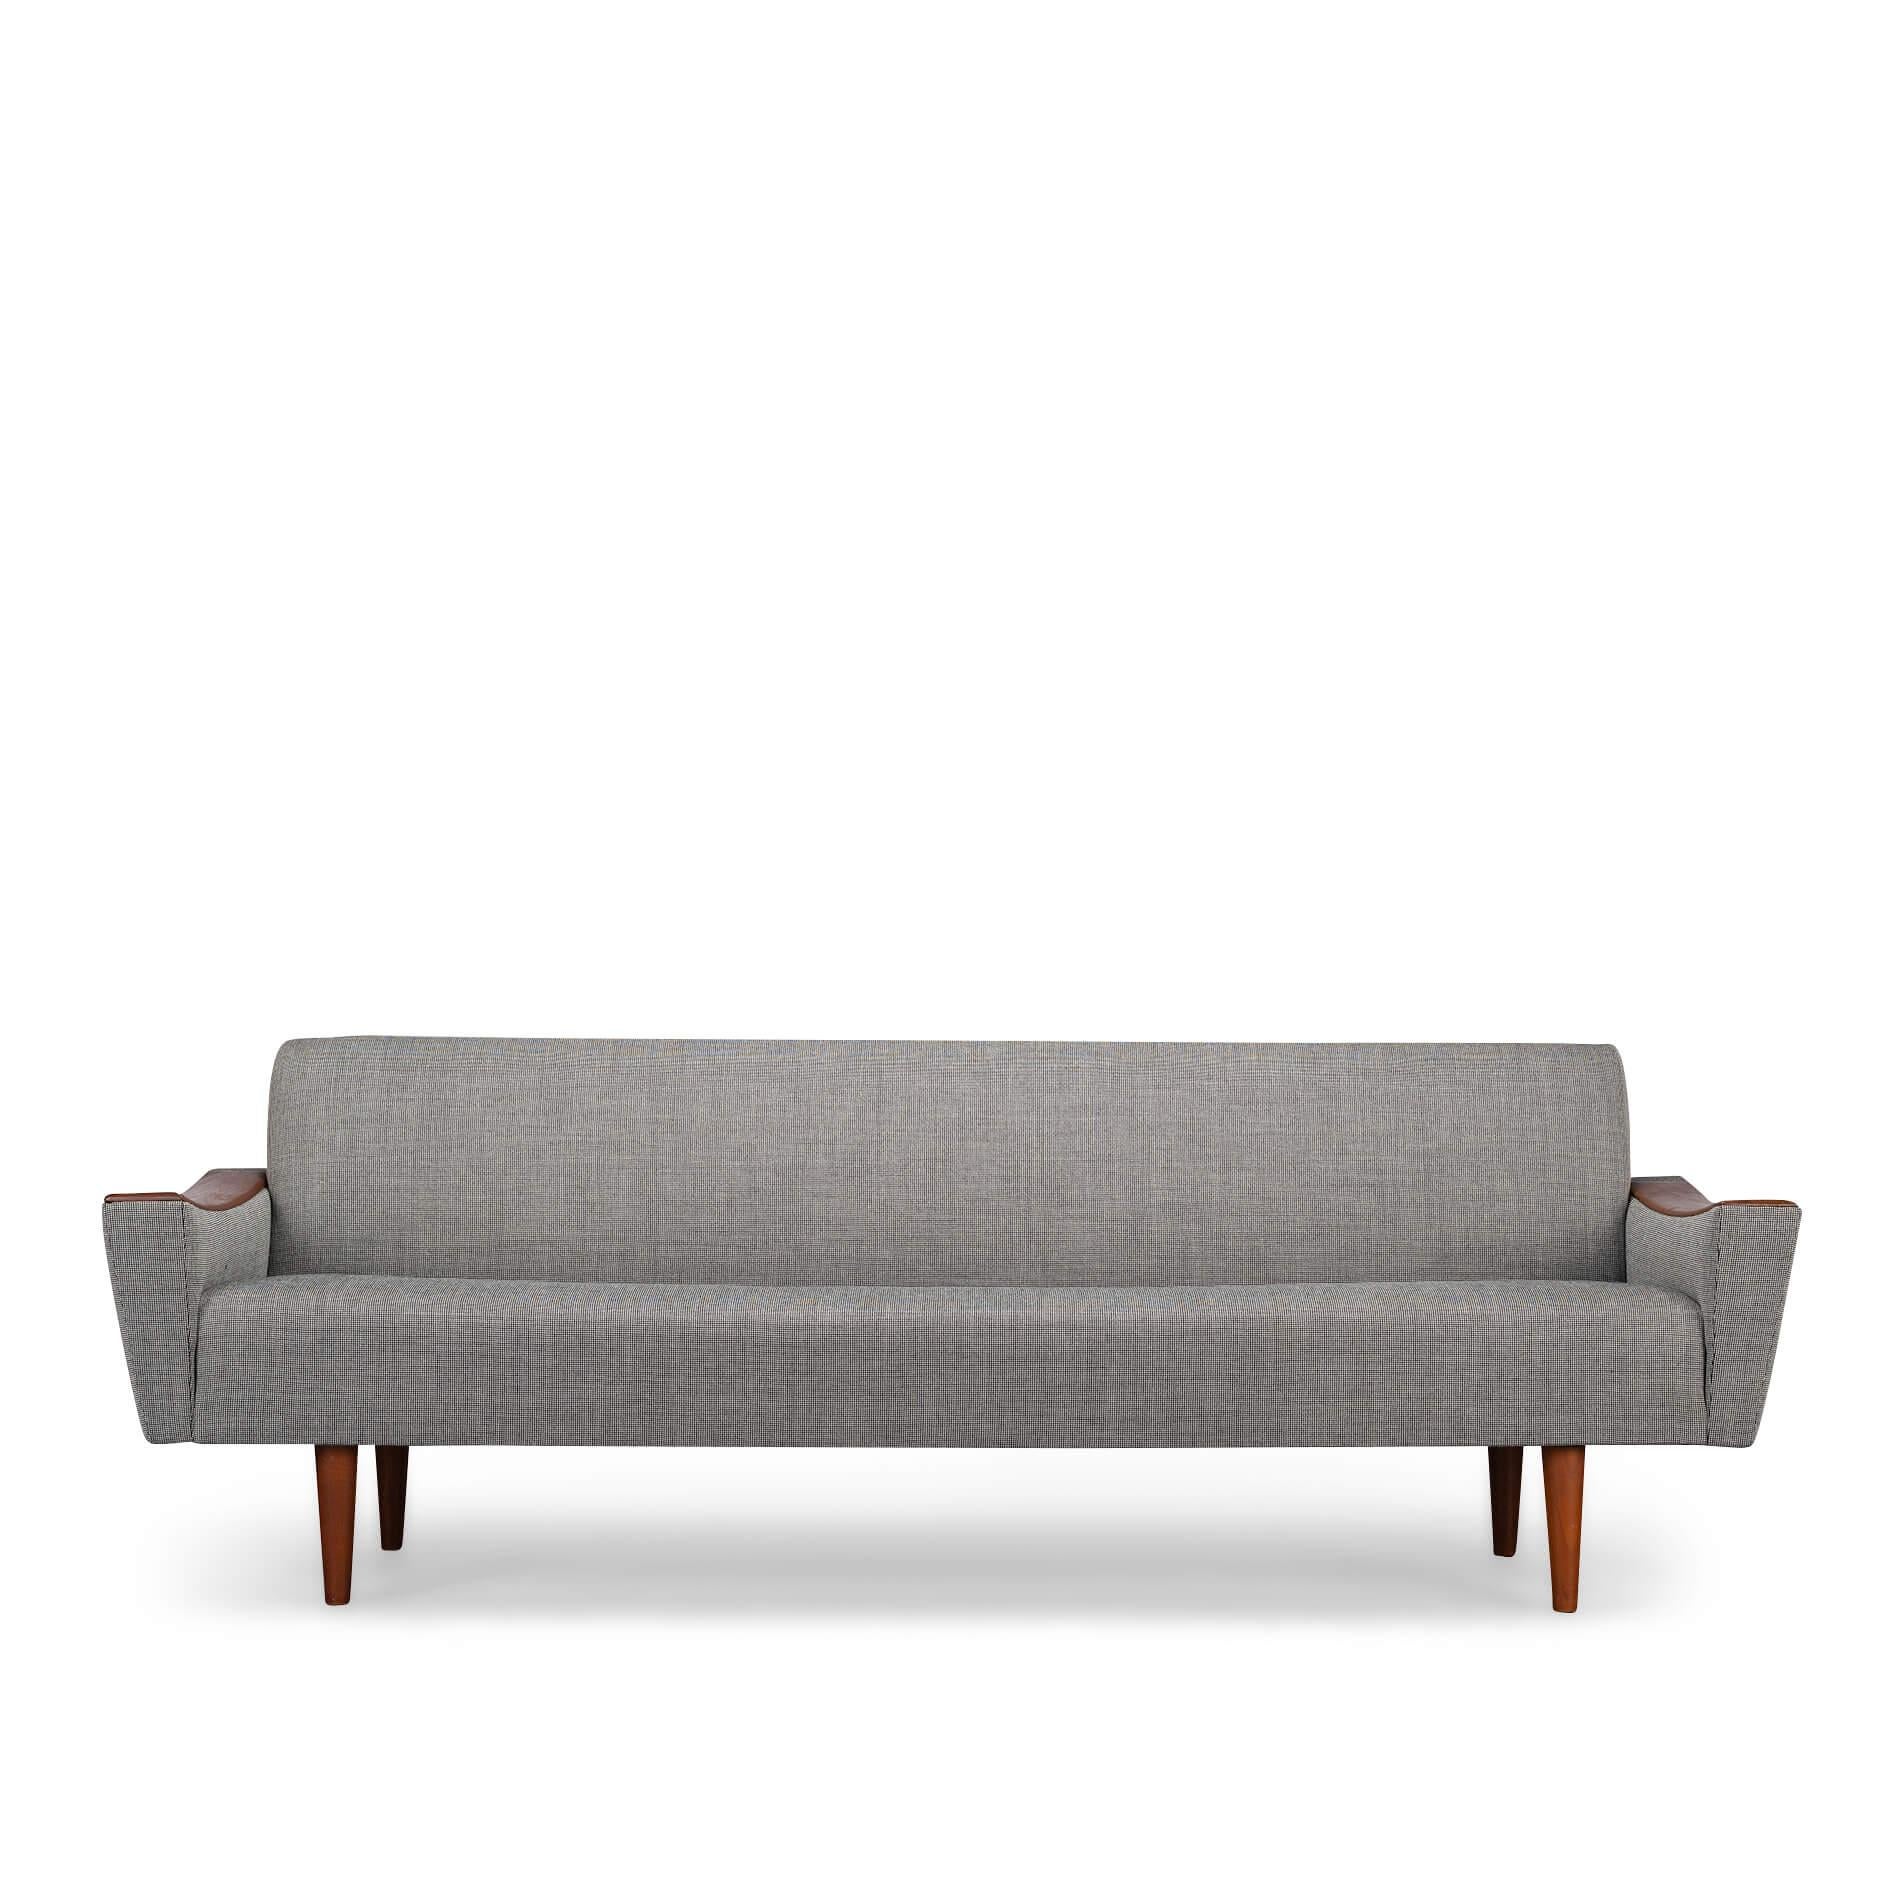 Stylish big sofa by CFC Silkeborg in stunning new upholstery in full accordance with the original upholstery. This sofa has a spacious yet straight seat. Ergonomic very wel suited to accommodate conversation and activity such as reading and work.